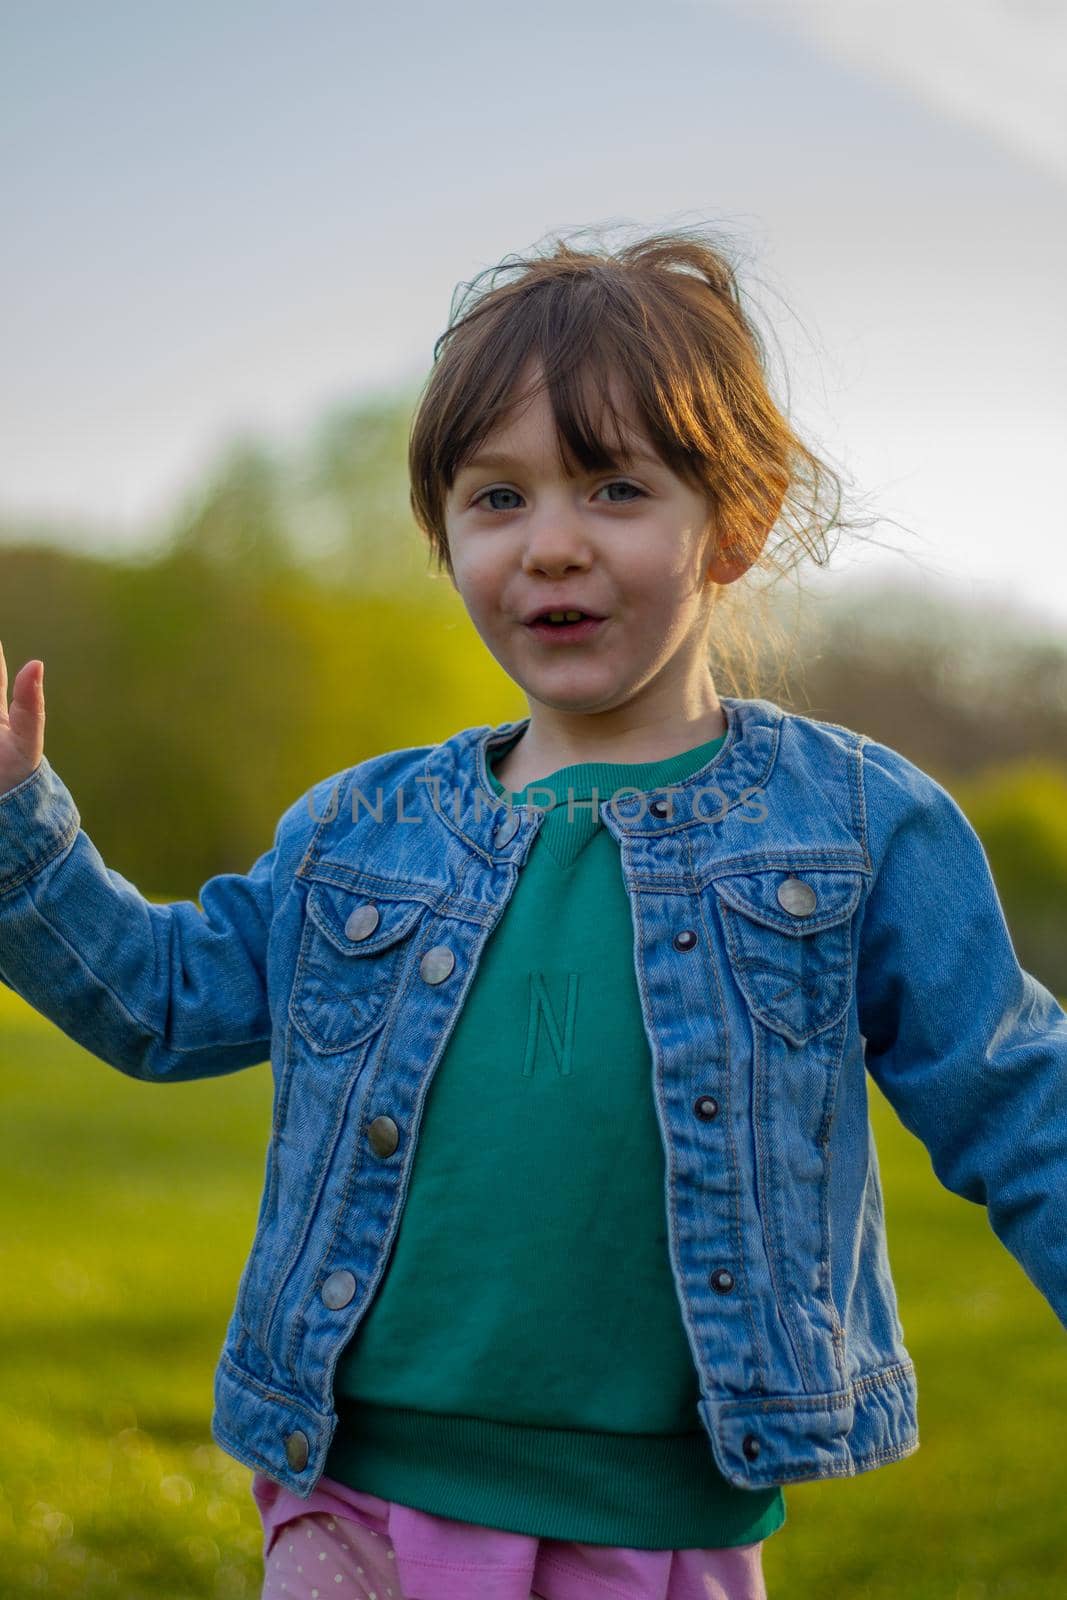 Portrait of a cute, brown-haired, blue-eyed baby girl wearing a blue jacket and green jumper running in a park on a sunny day